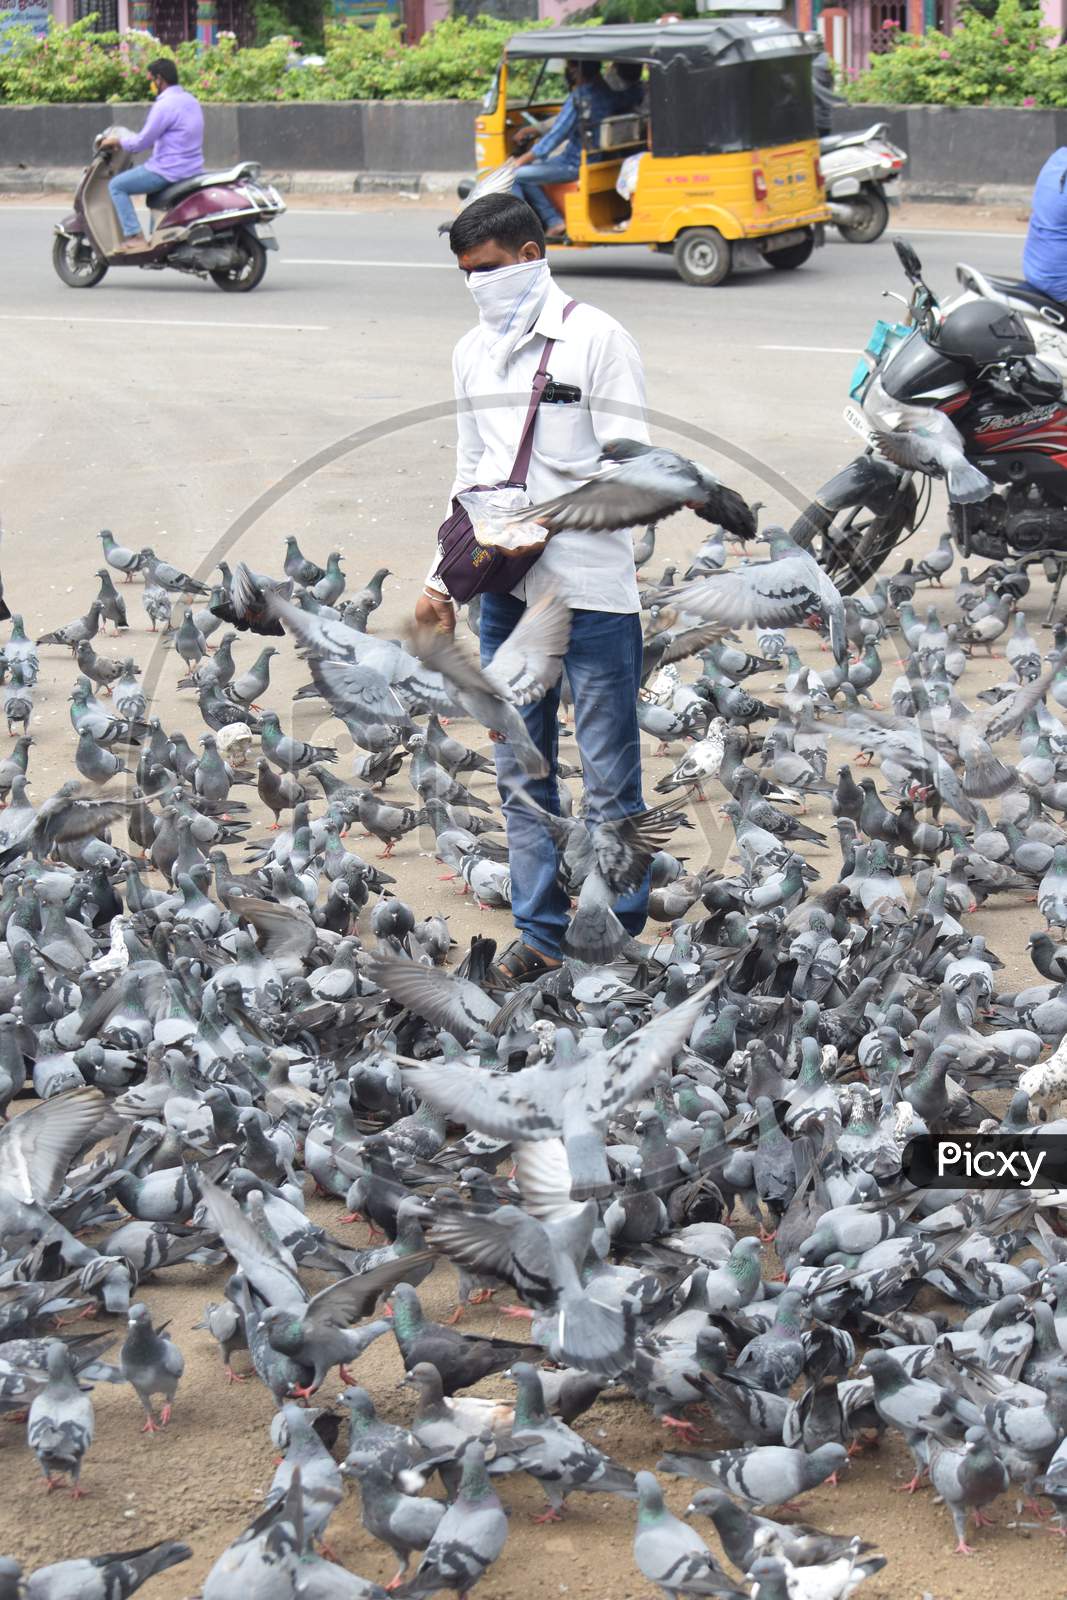 Hyderabad, Telangana, India. july-13-2020: A man is feeding pigeons all around in corona virus pandemic time, peoples caring on birds, wearing mask